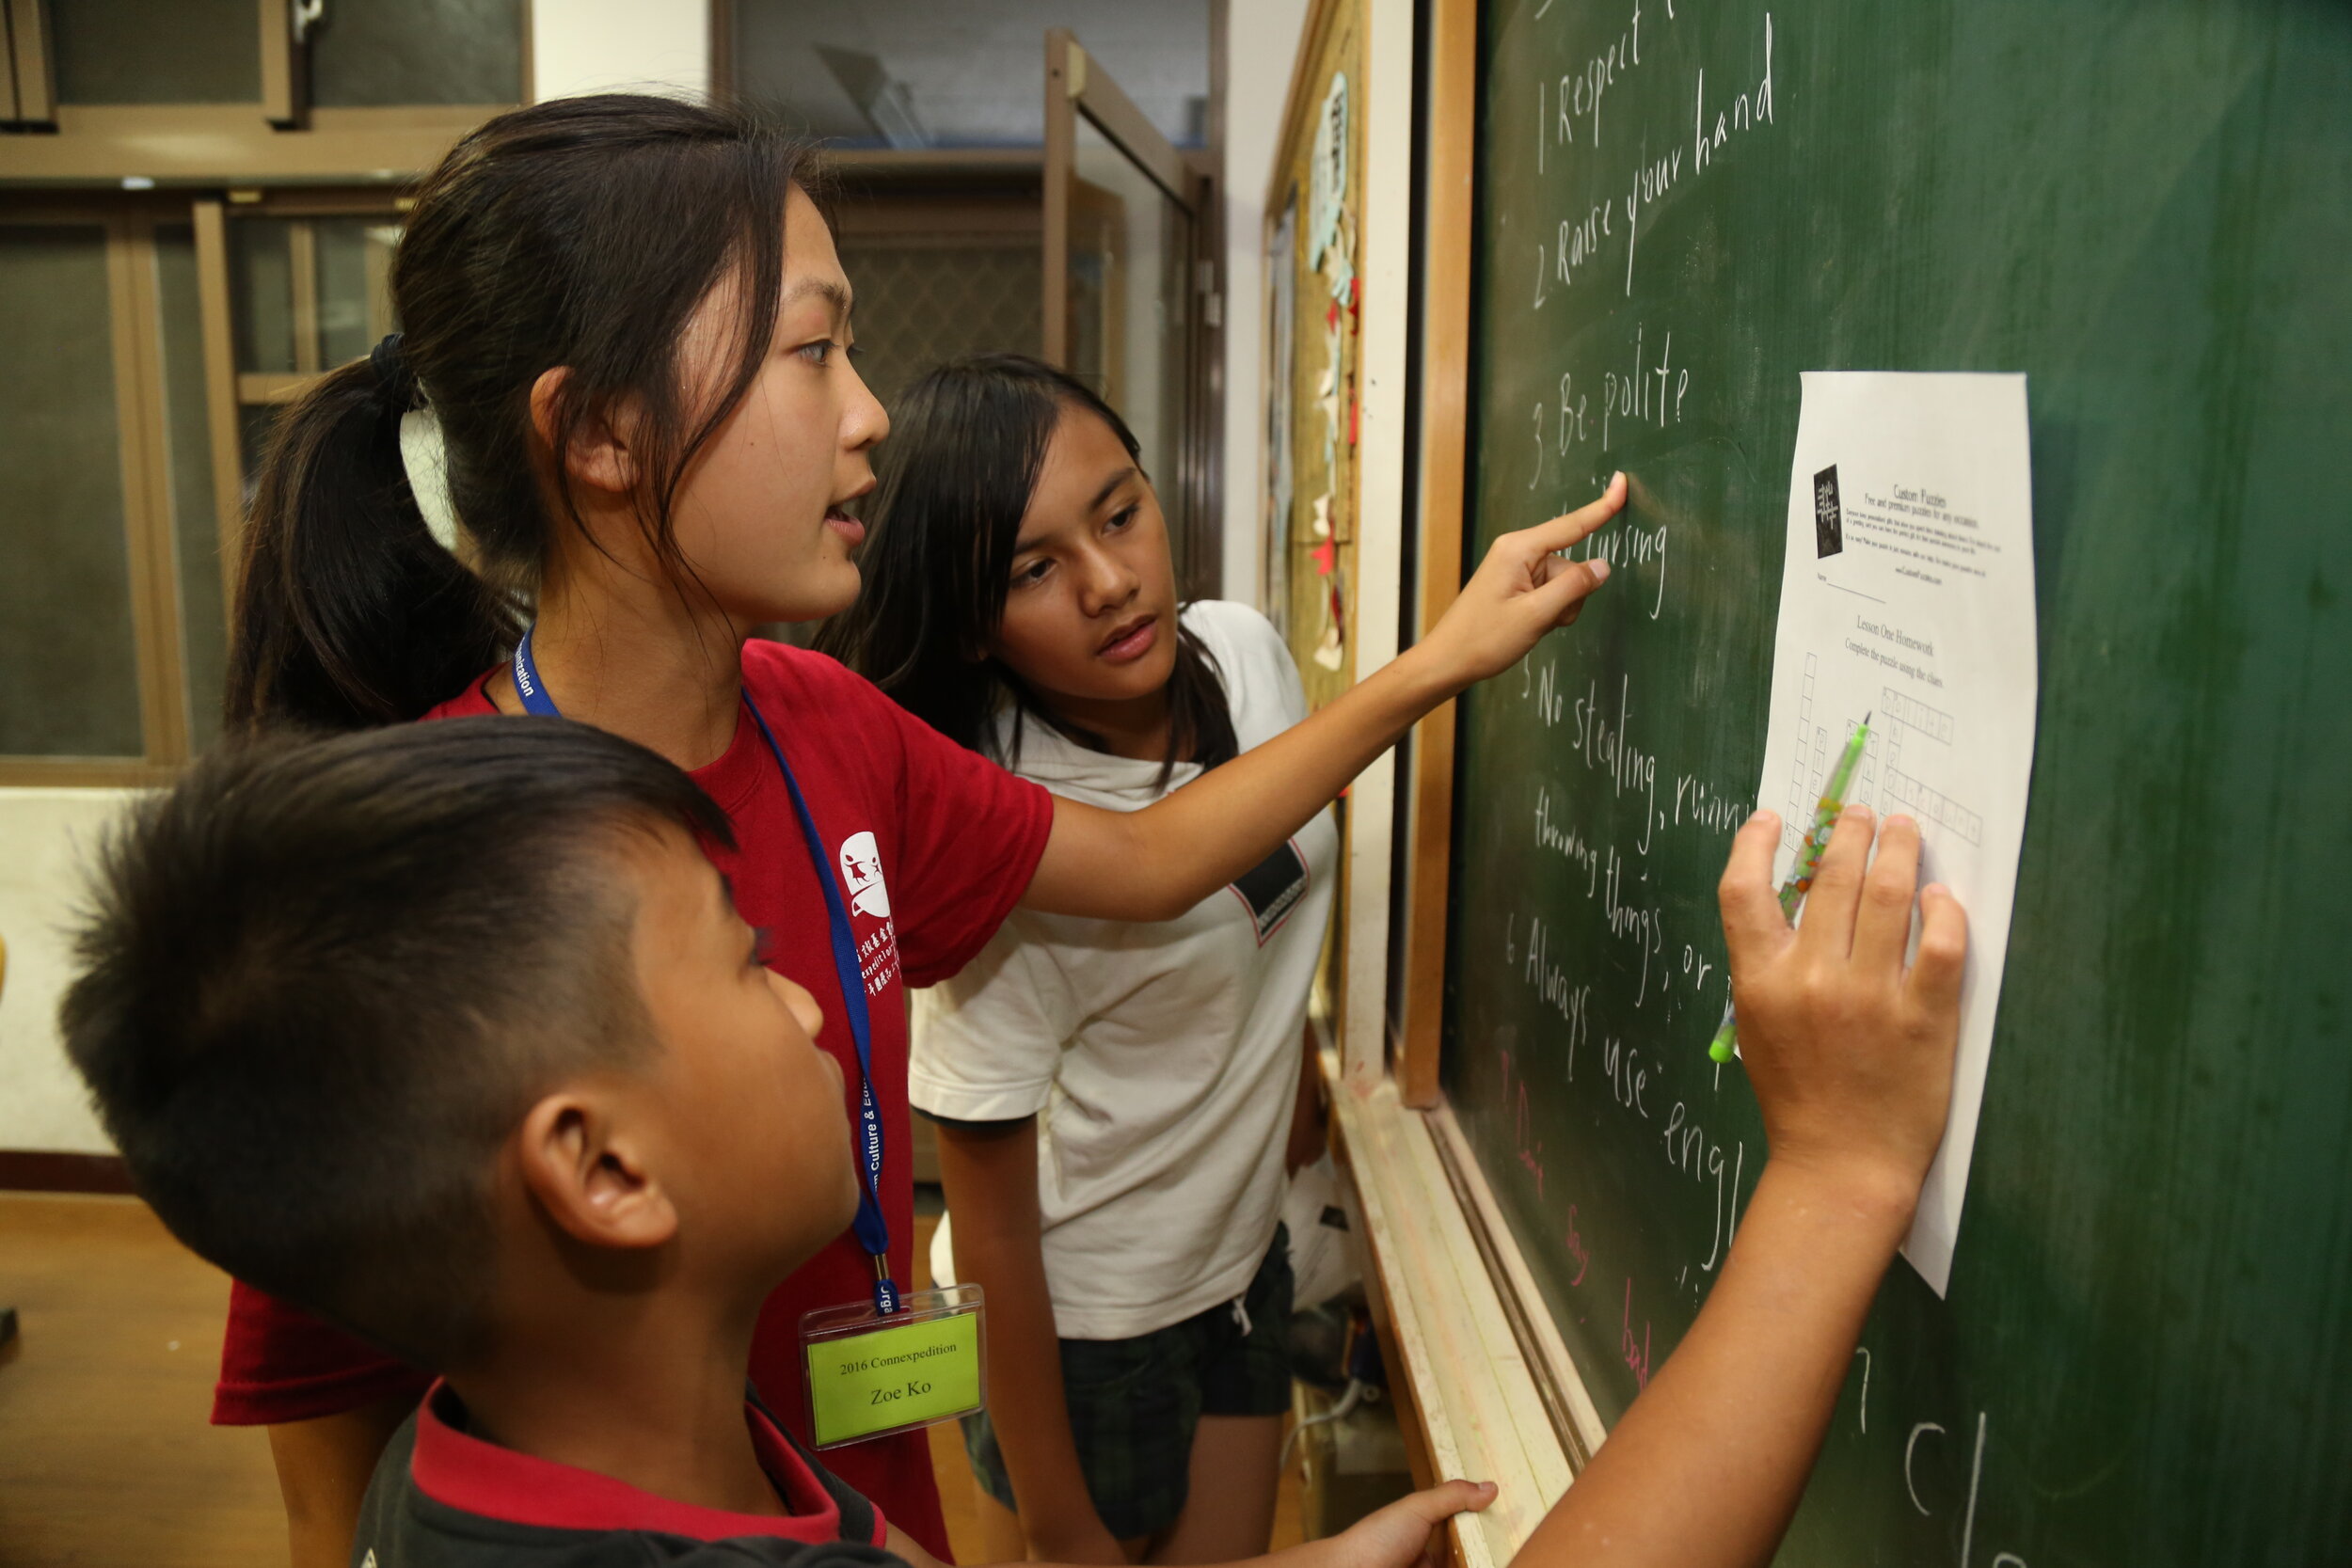   Volunteer    Teach English in Taiwan this summer and join our family of volunteers.    Connexpedition Service Trips  